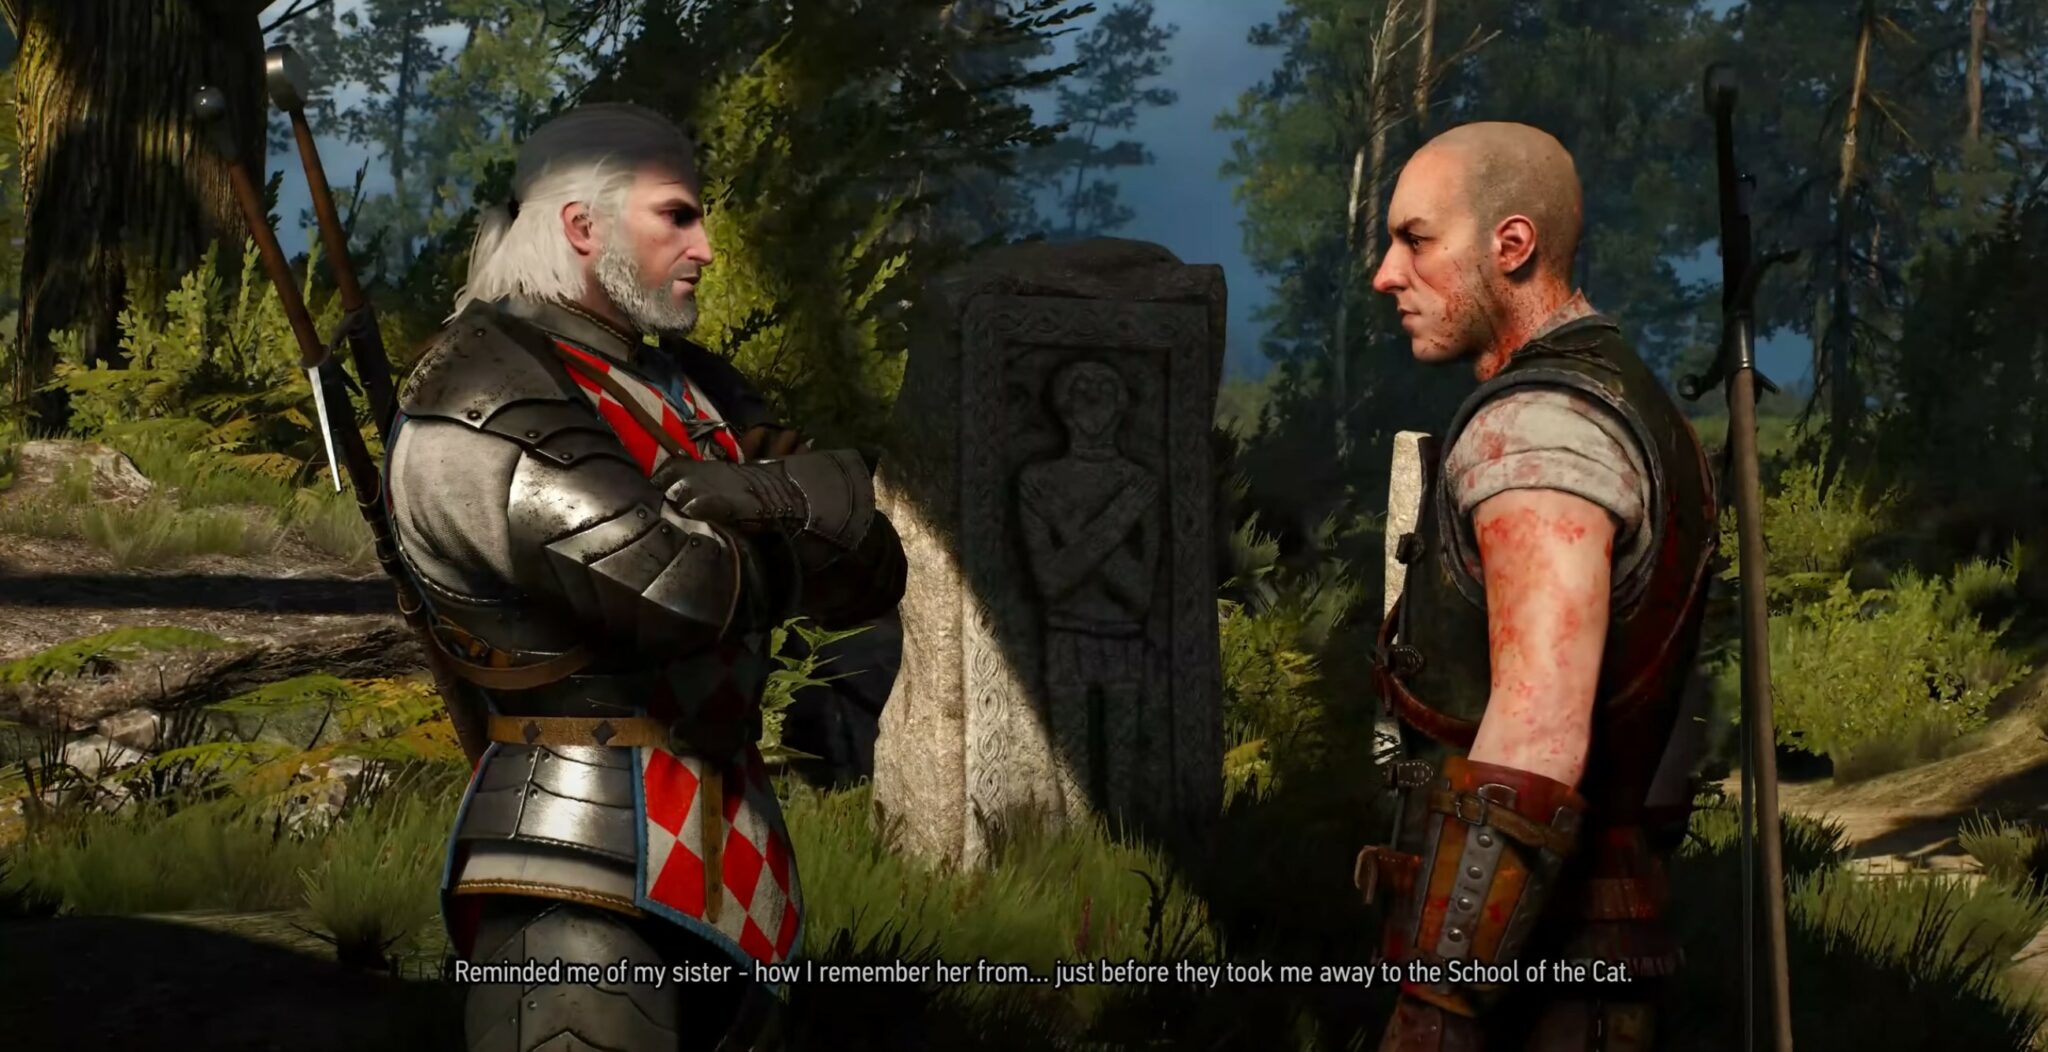 The play quest witcher 3